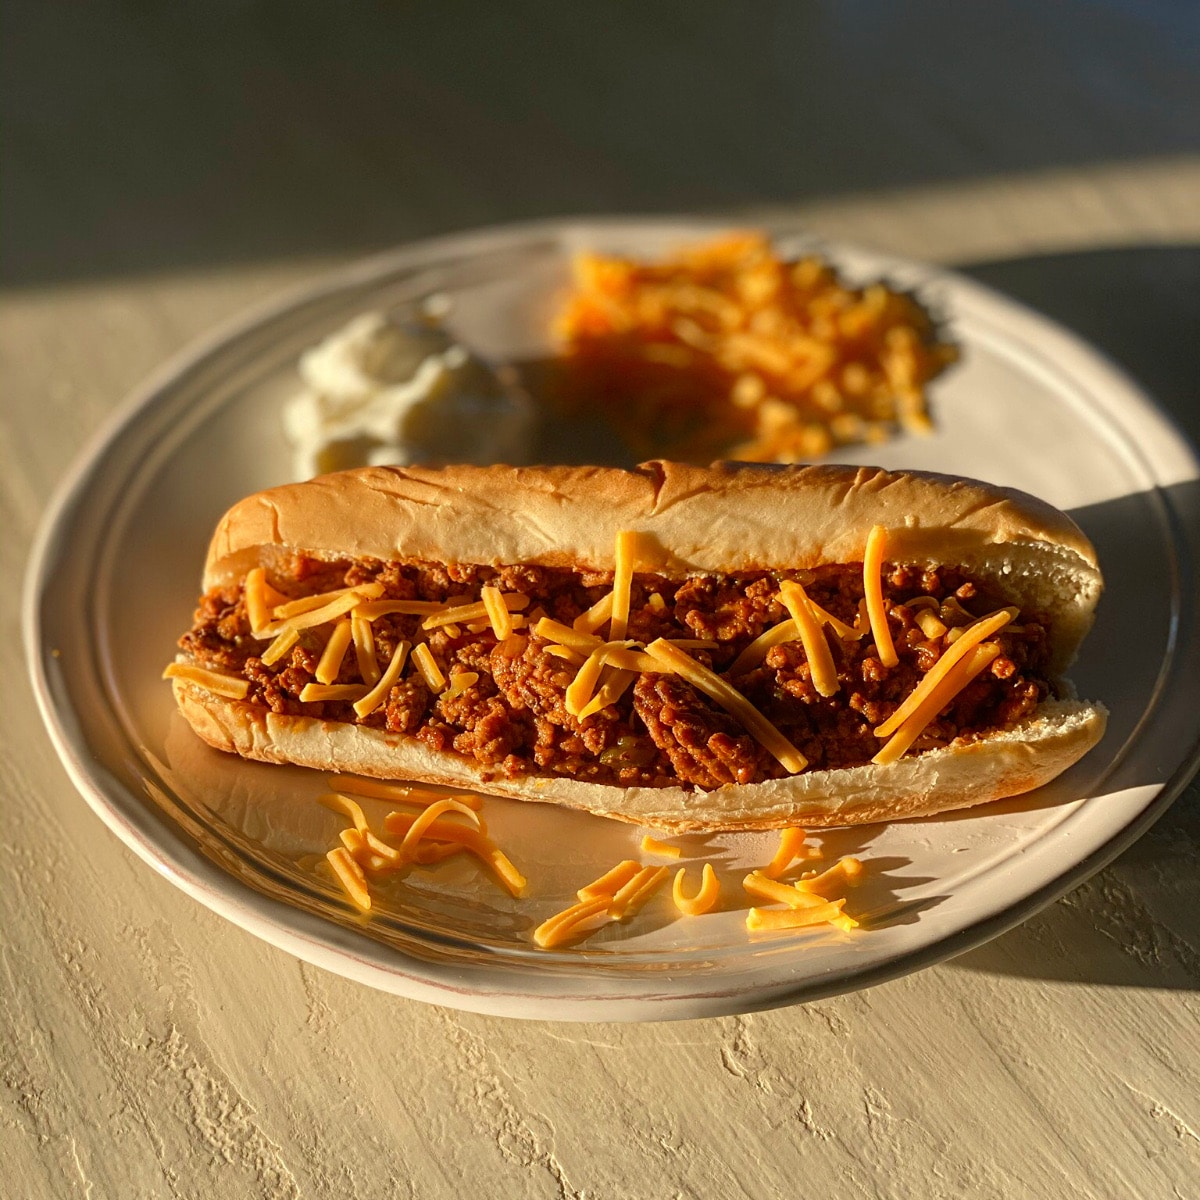 finished sandwich on a long roll sprinkled with shredded cheese